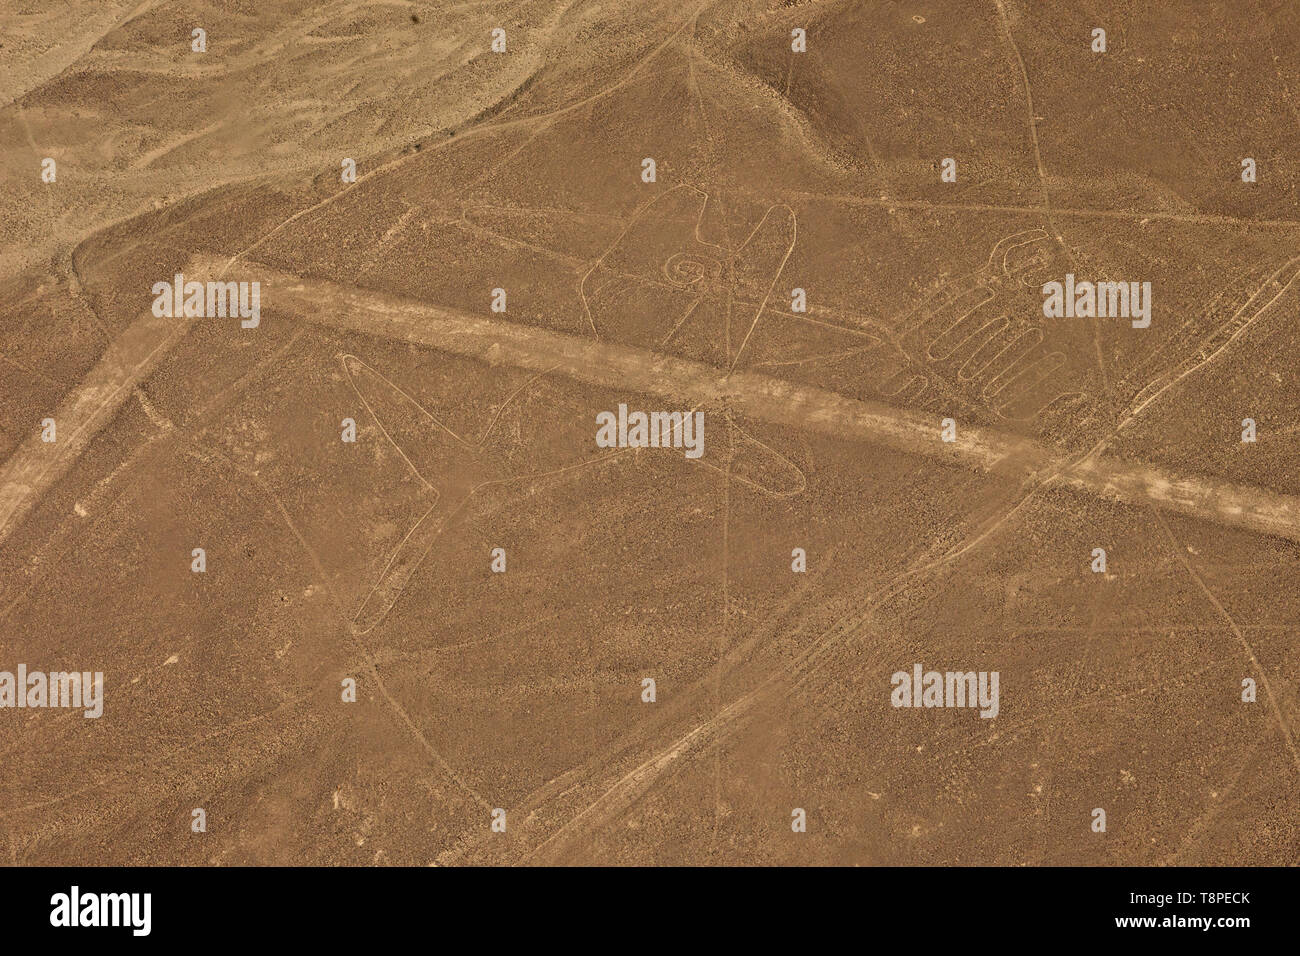 Nazca lines in Peru from an airplane Stock Photo